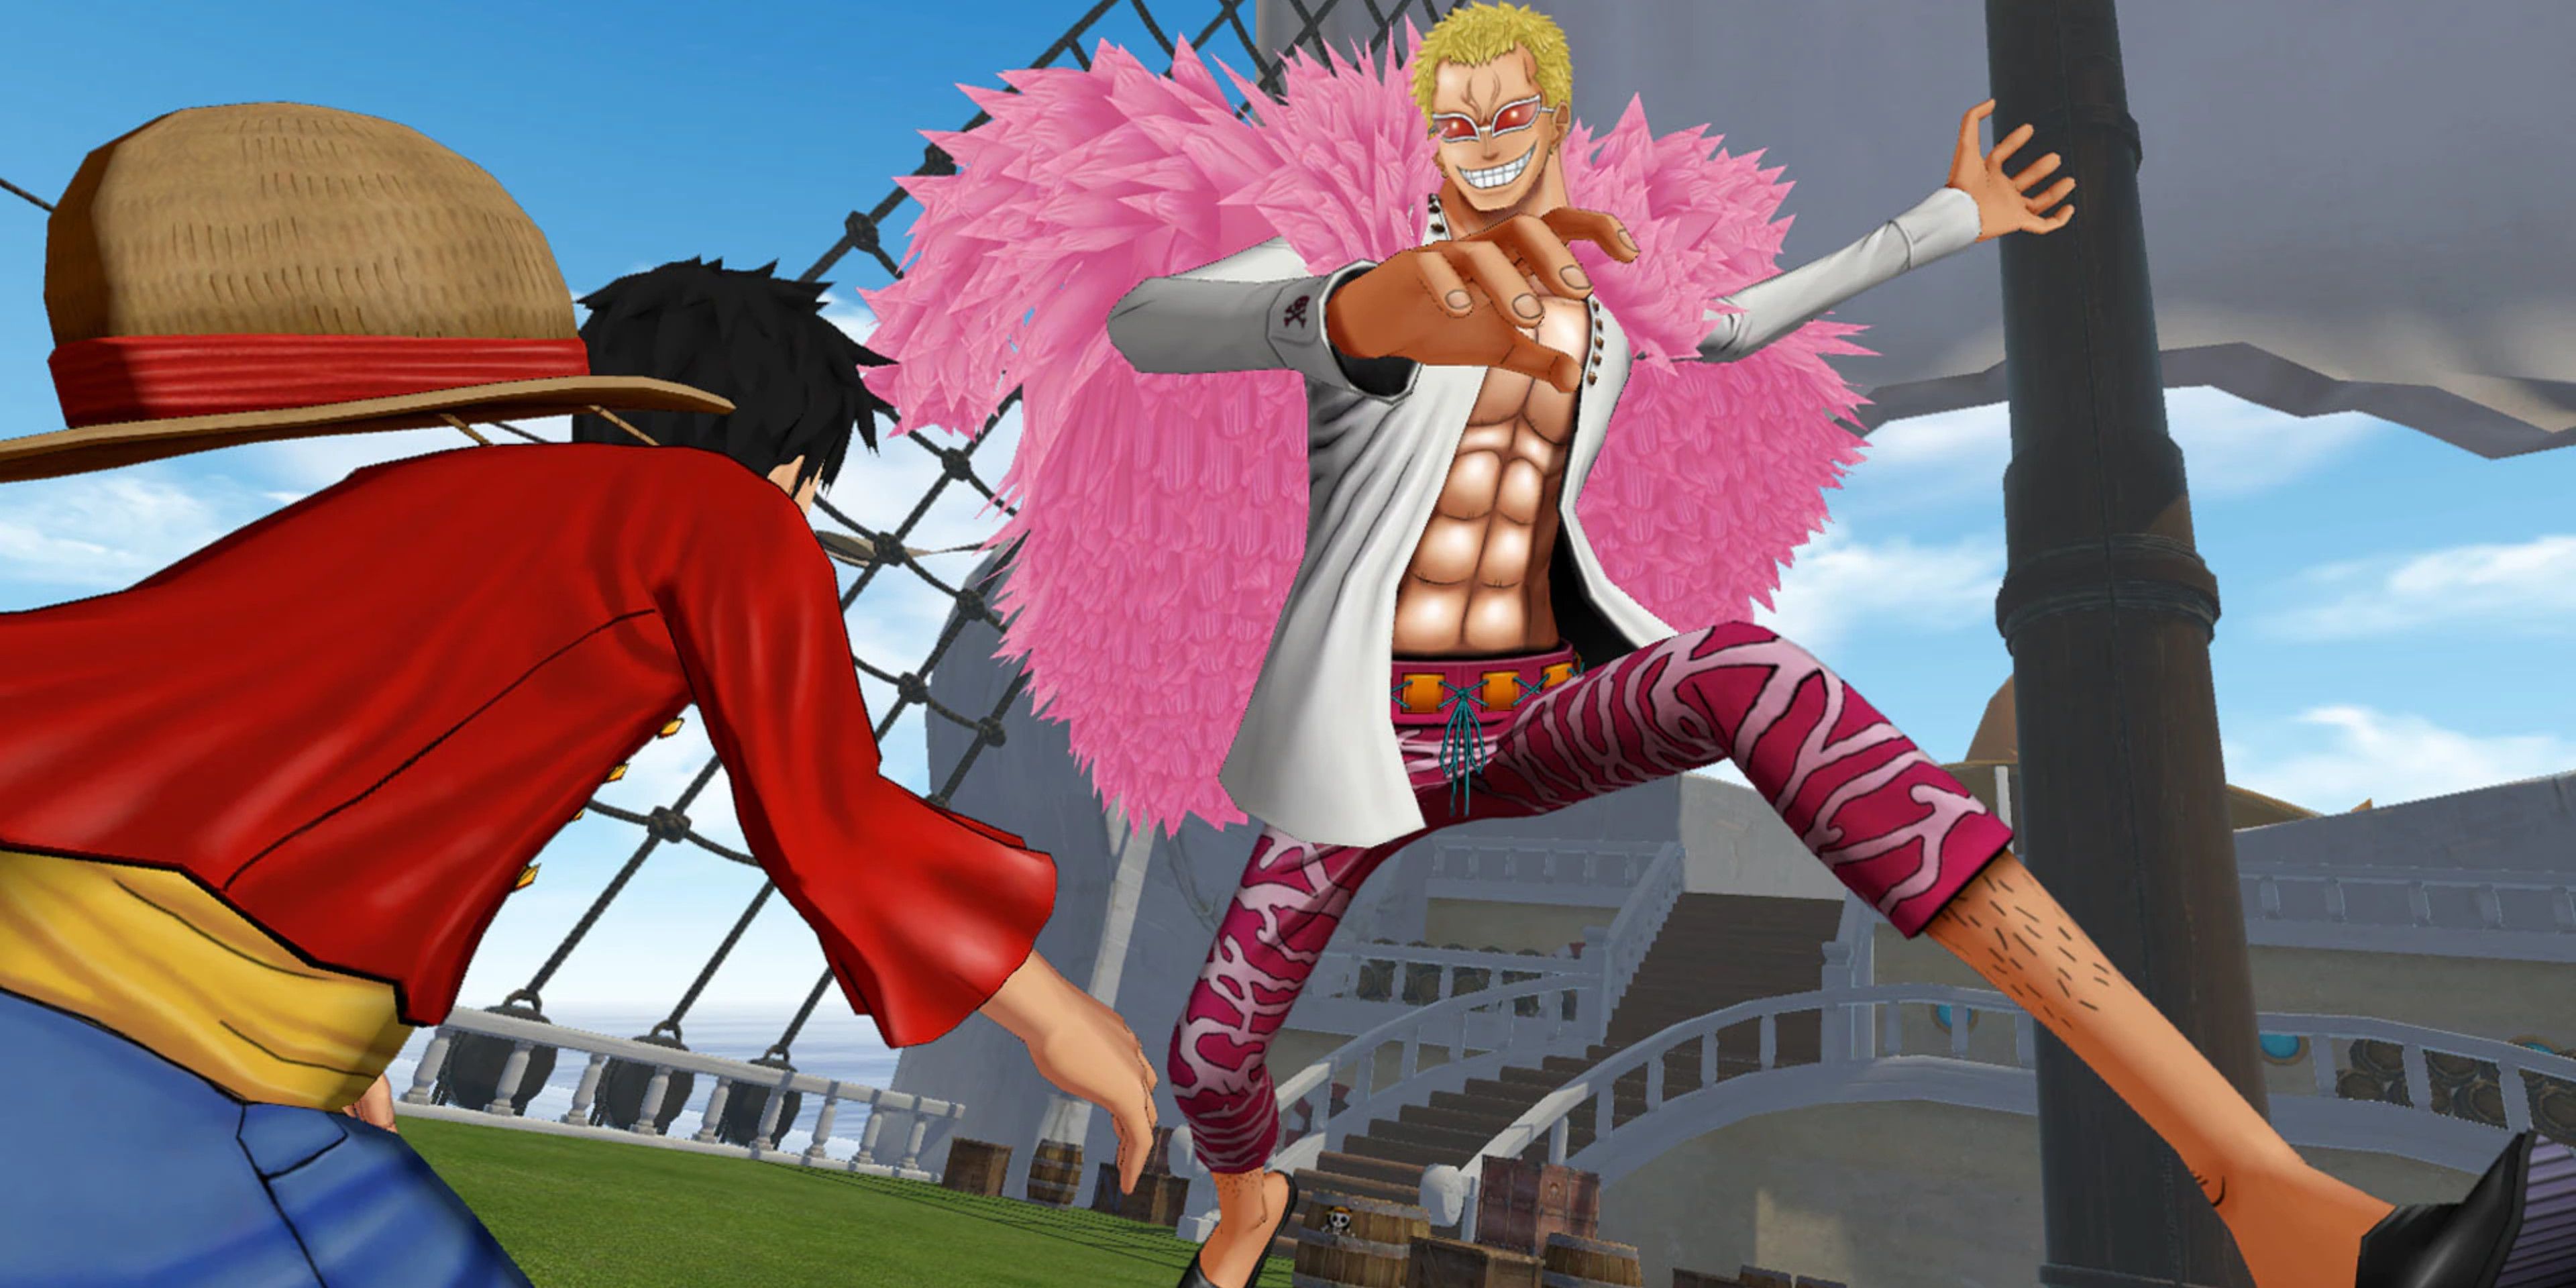 First person perspective of Luffy from the Straw Hat being attacked by Doflamingo on the deck of the Thousand Sunny